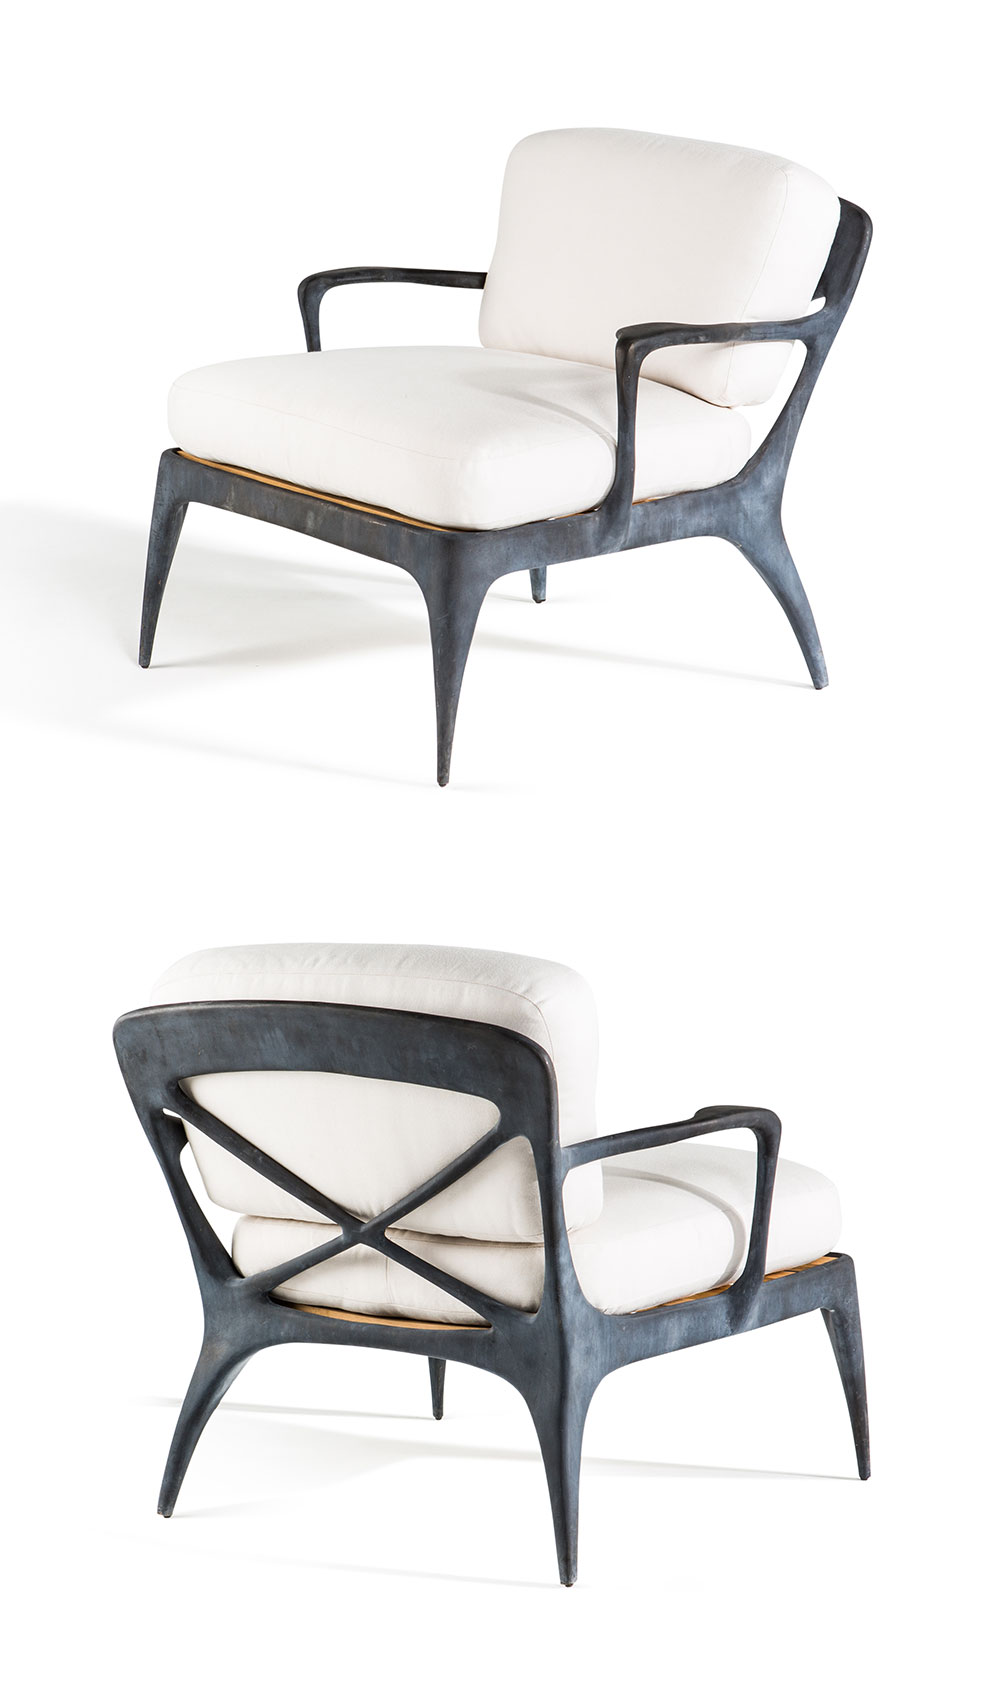 New for 2013, the CAS1 Lounge Chair